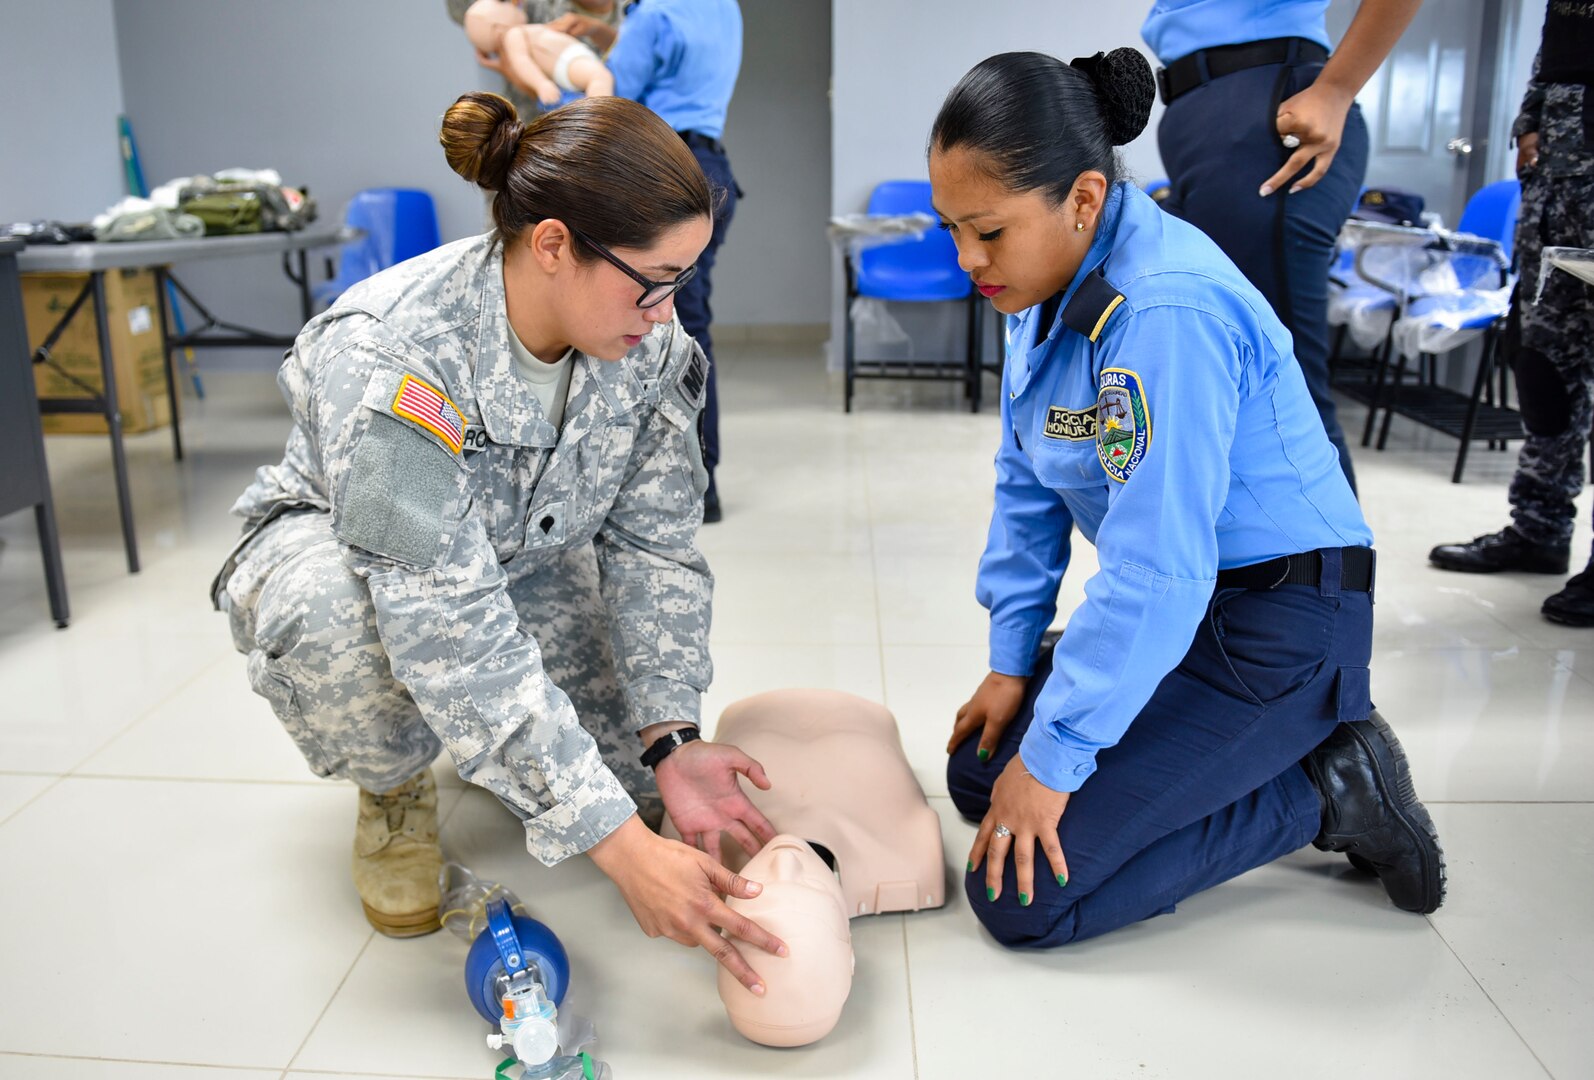 Joint Security Forces and local police forces participate in Subject Matter Expert Exchange to practice life saving techniques for emergency situations.